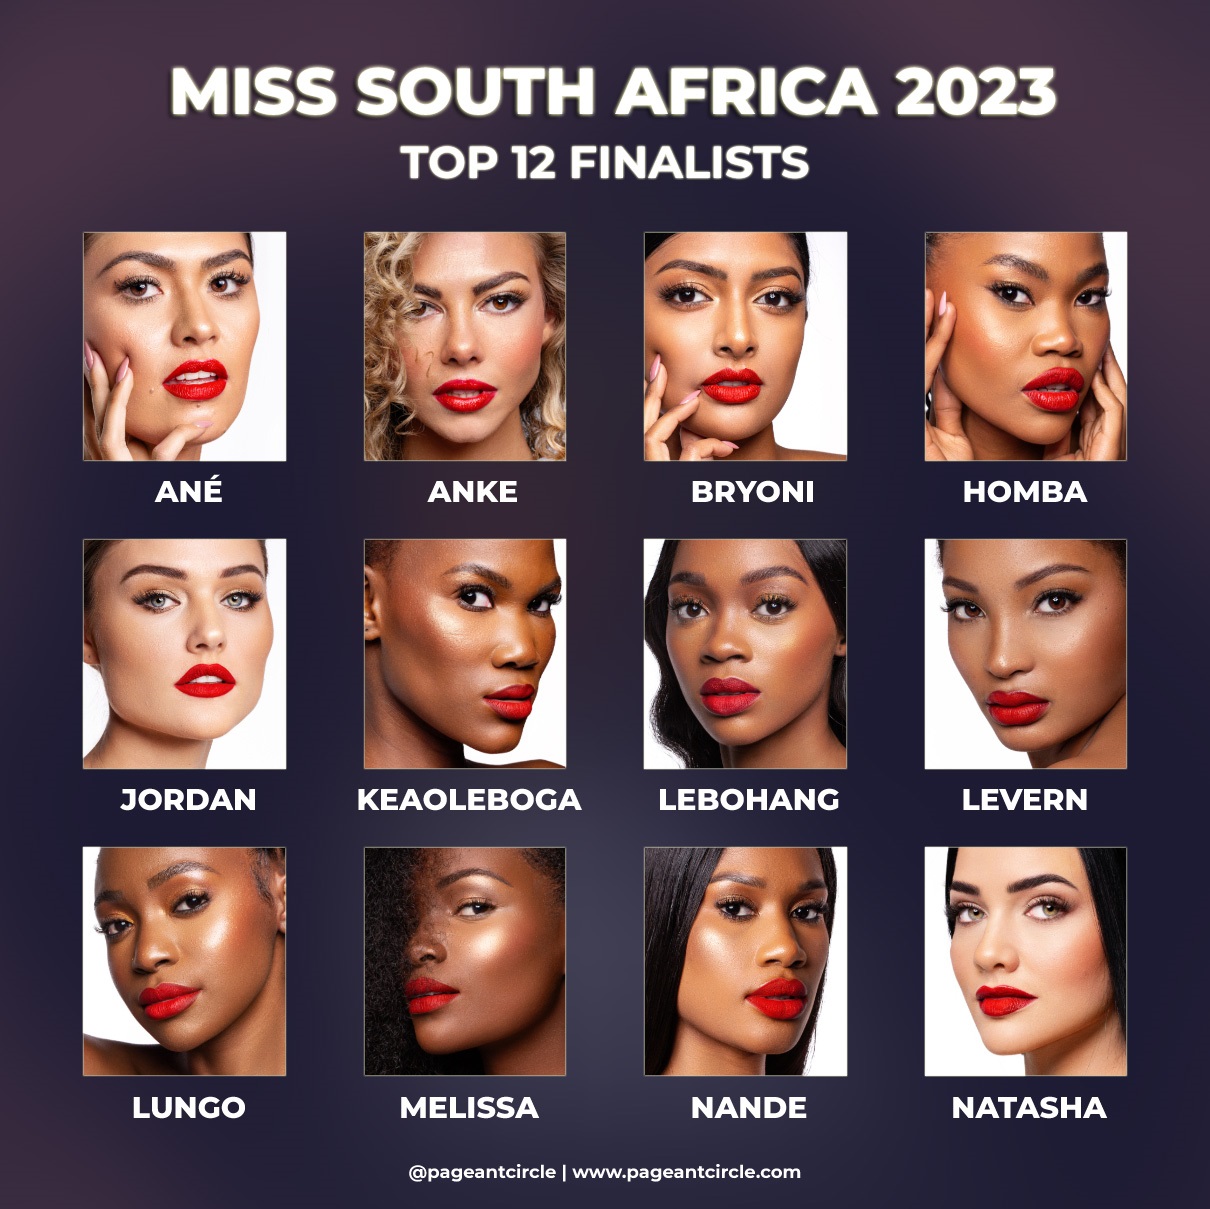 Miss South Africa 2023: Meet the Top 12 finalists